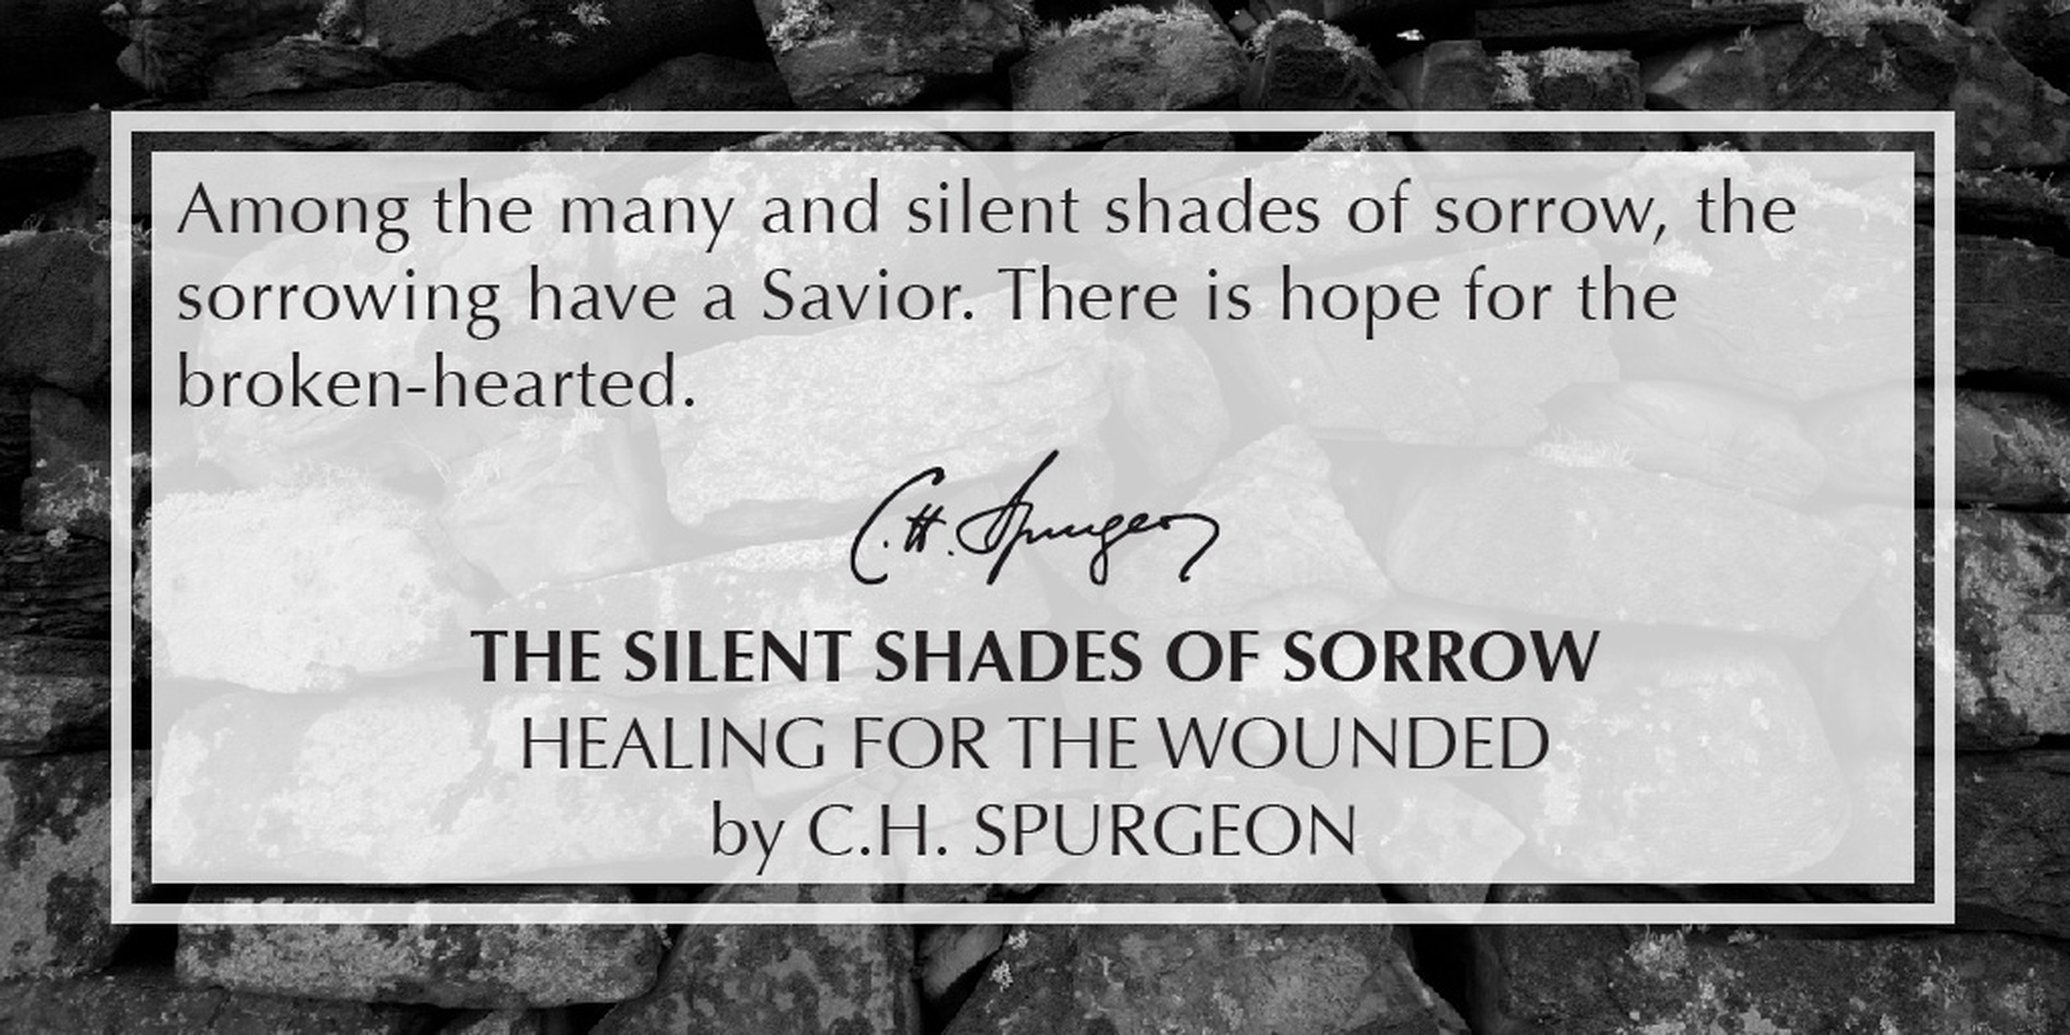 The Silent Shades of Sorrow: Healing for the Wounded by C. H. Spurgeon